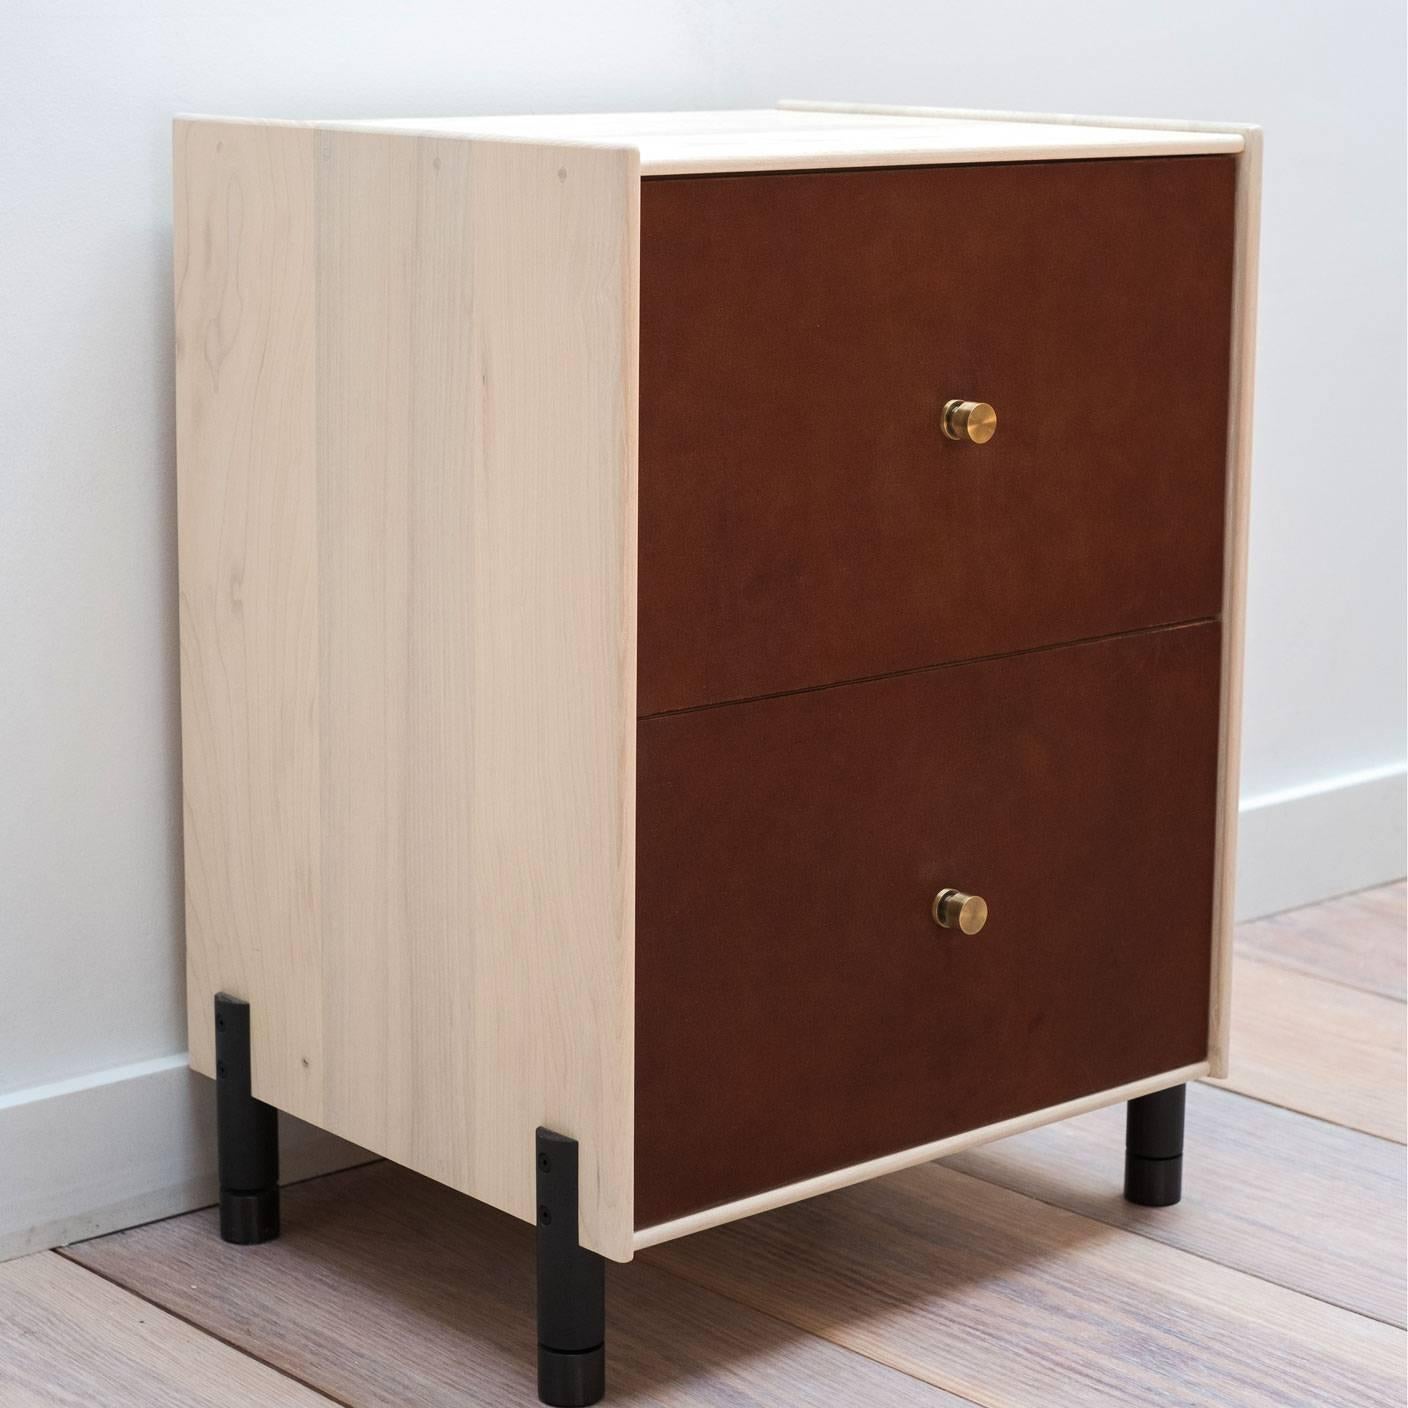 The Profile Bedside Table is an elevated take on traditional cabinet construction with a clean, minimal edge framing vegetable-tanned leather drawer faces. Both the wood and leather are hand-finished in our New York City based artisan workshop. This